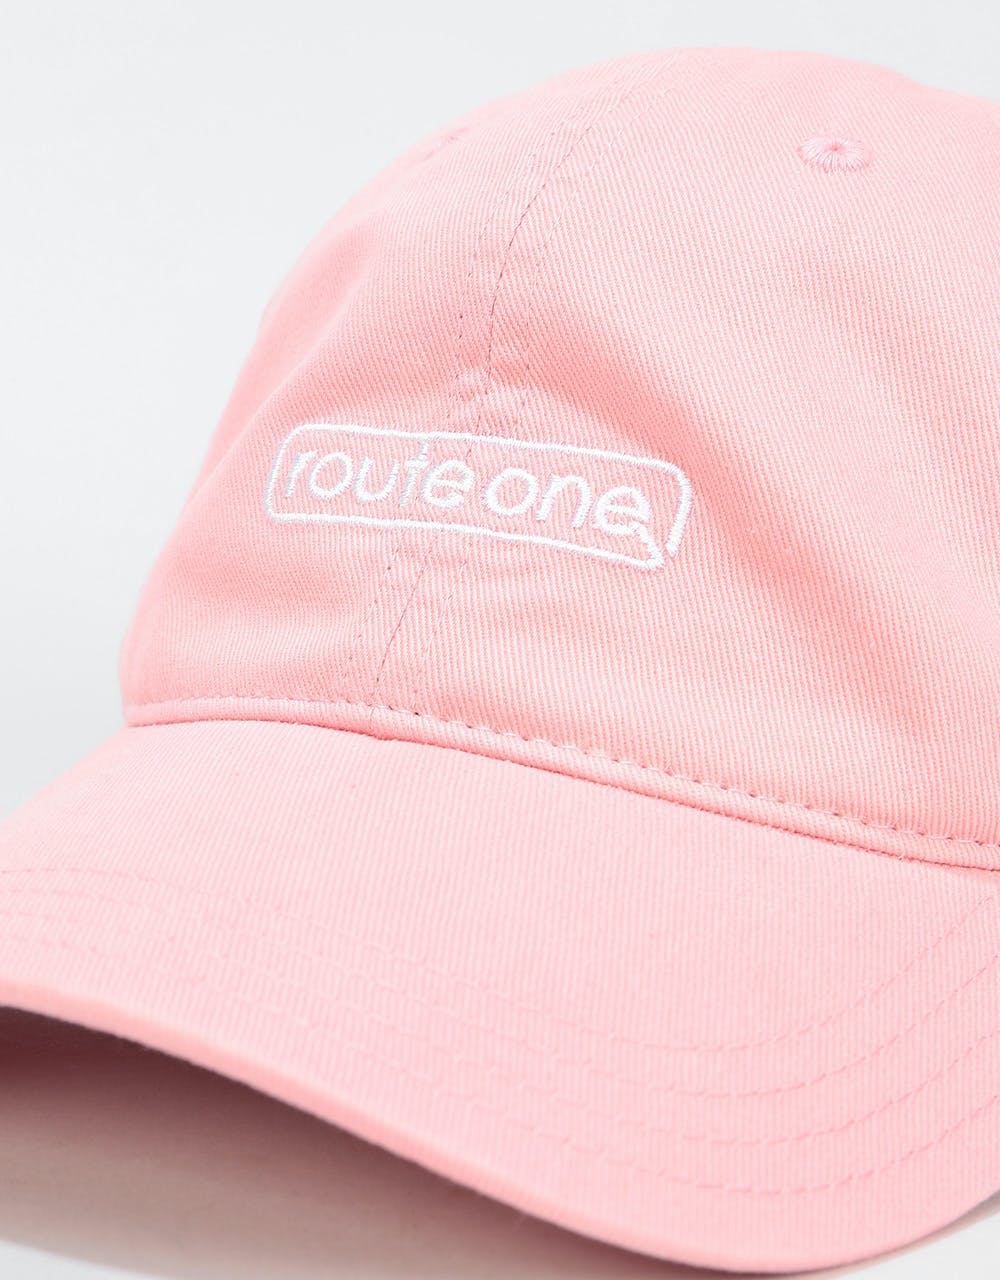 Route One Protection Cap - Light Pink